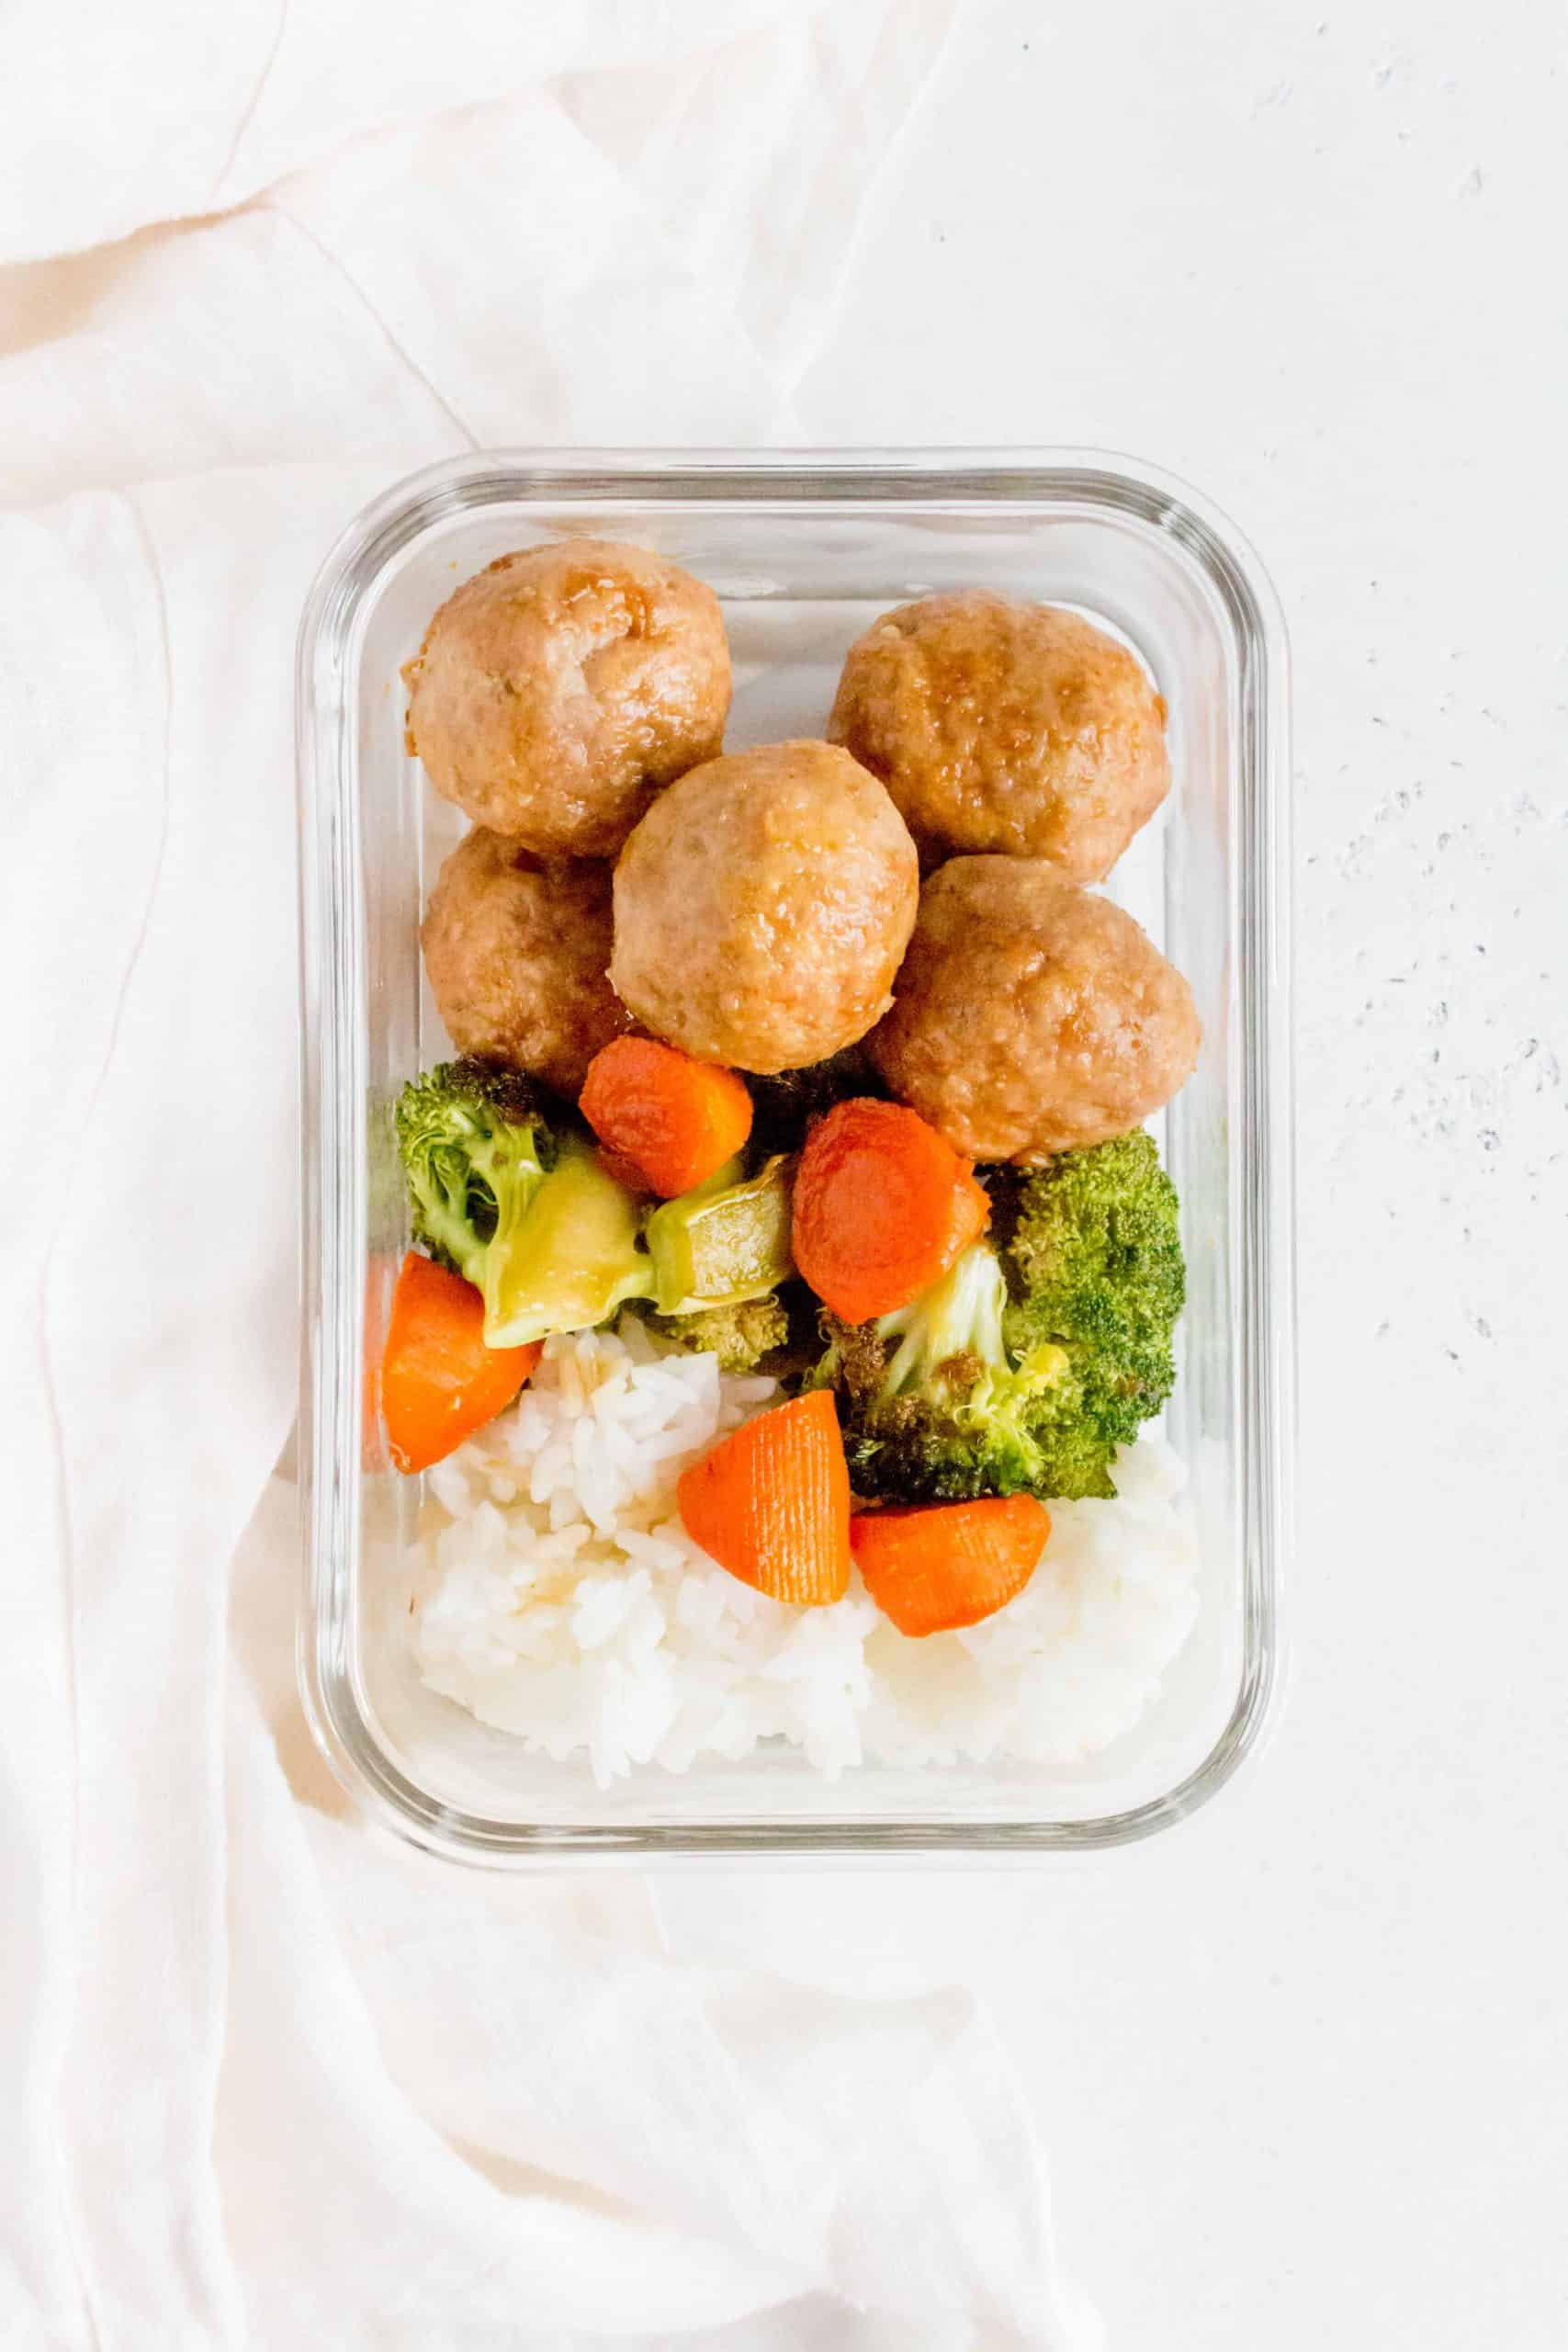 Sweet and tangy, these Chicken Teriyaki Meatballs with Broccoli and Carrots is better than takeout! Make them at home today or freeze them for later.